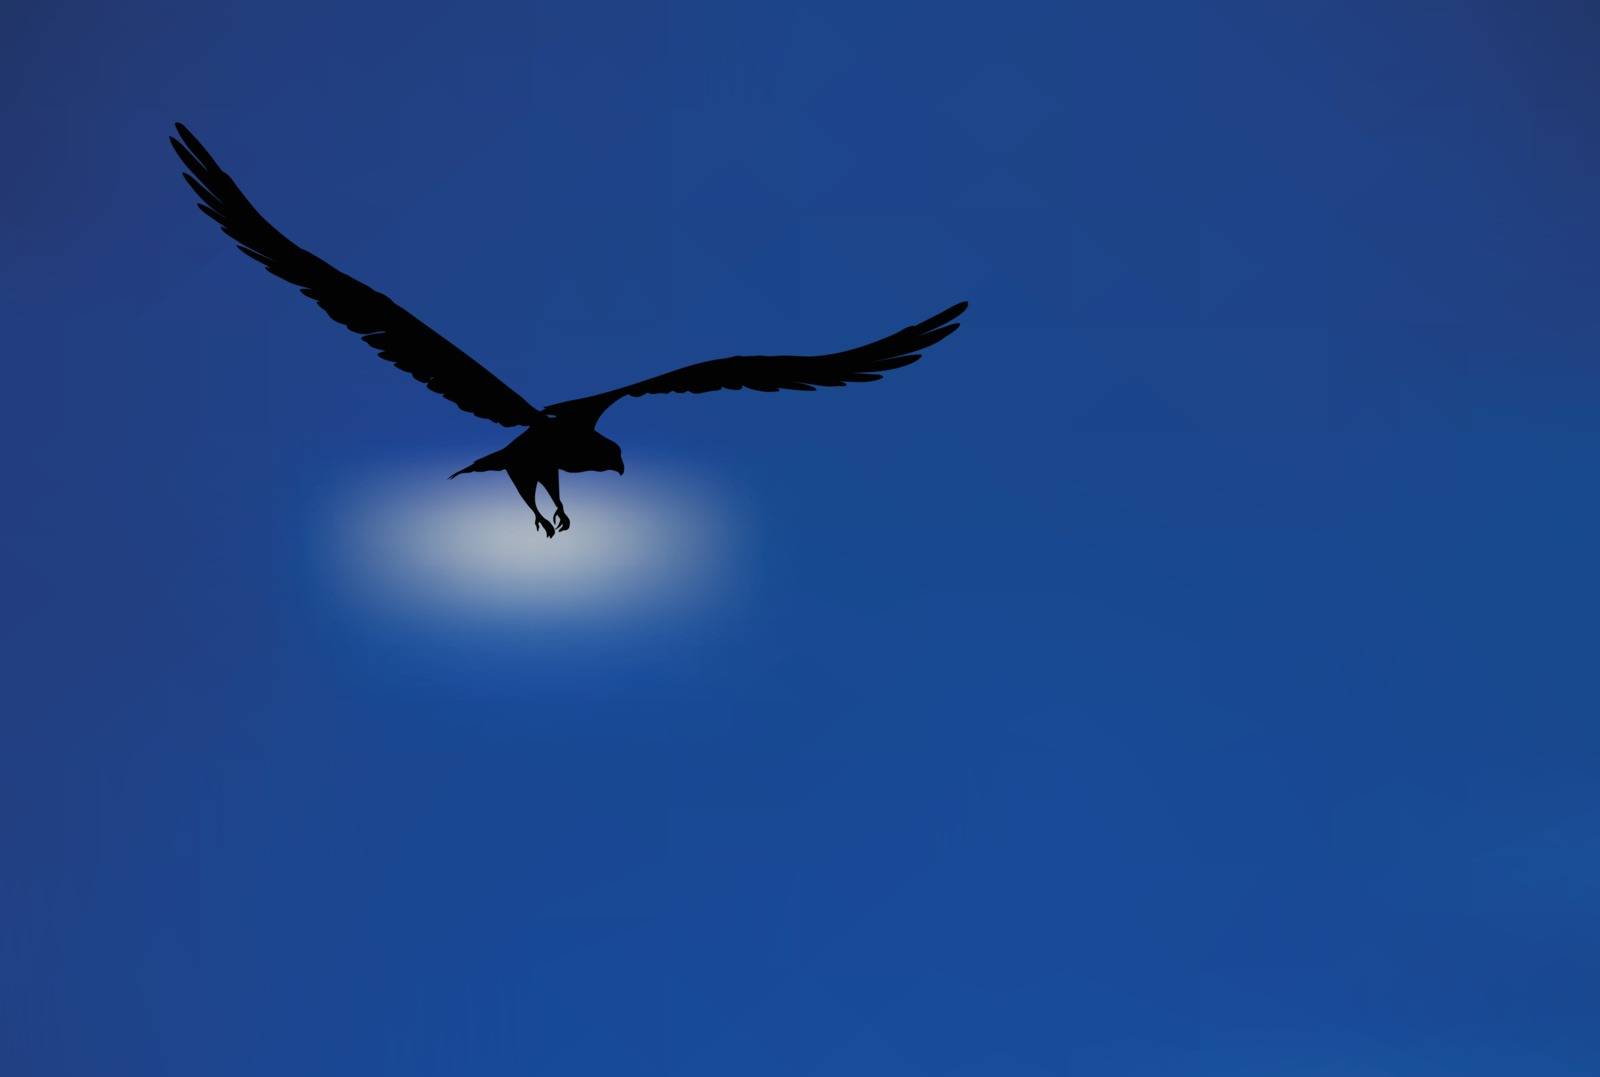 eagle silhouette by Istanbul2009